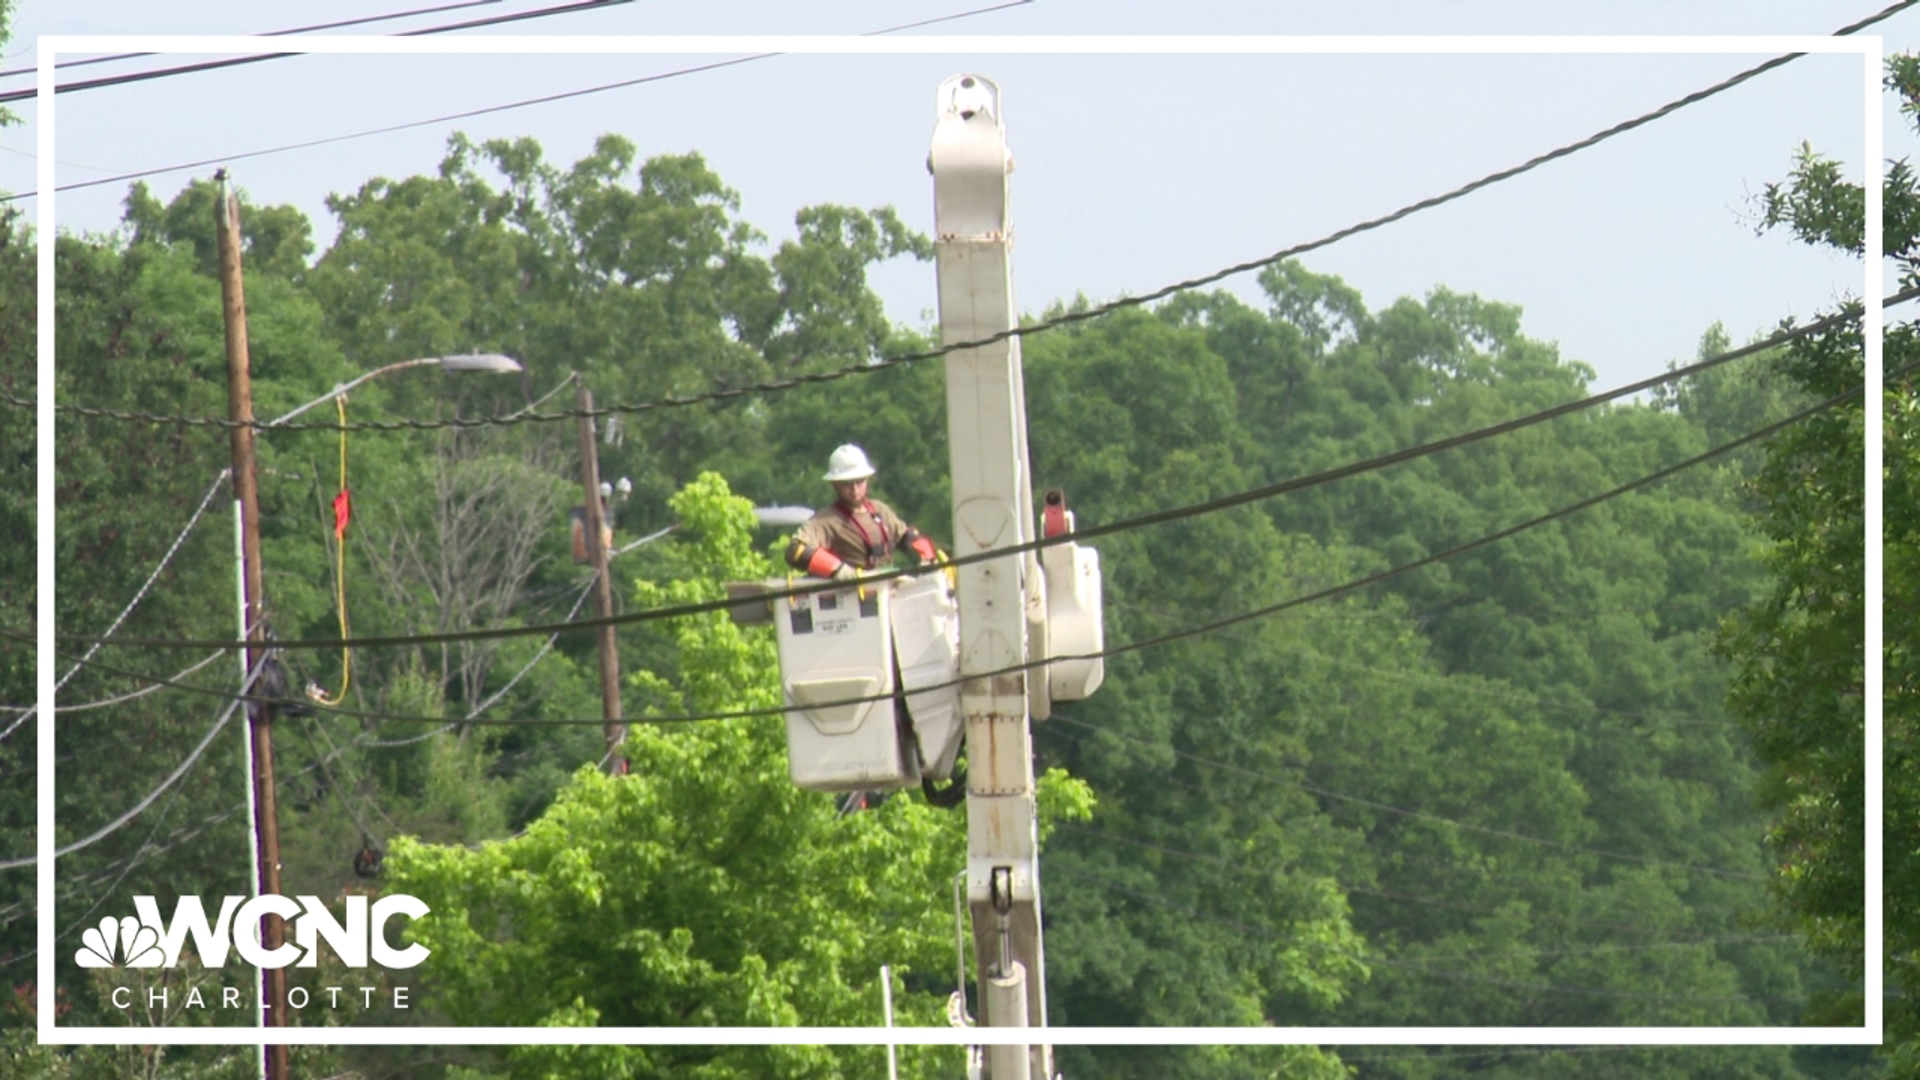 Myles Harris shares how the utility determines when and where to restore power after major storms.